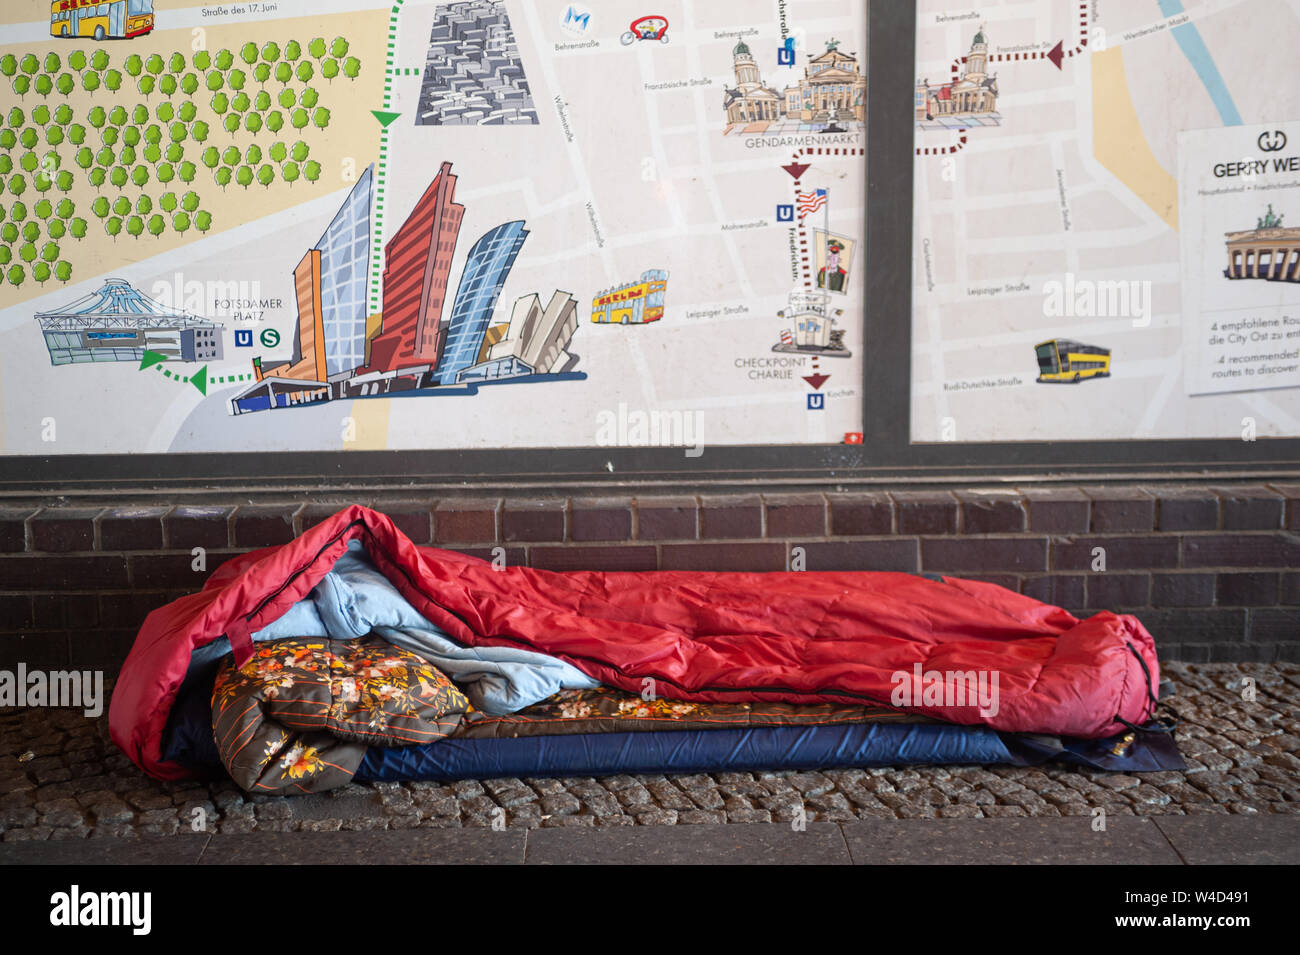 25.06.2019, Berlin, Germany, Europe - Sleeping place of a homeless person at Bahnhof Friedrichsstrasse railway station in Berlin-Mitte. Stock Photo